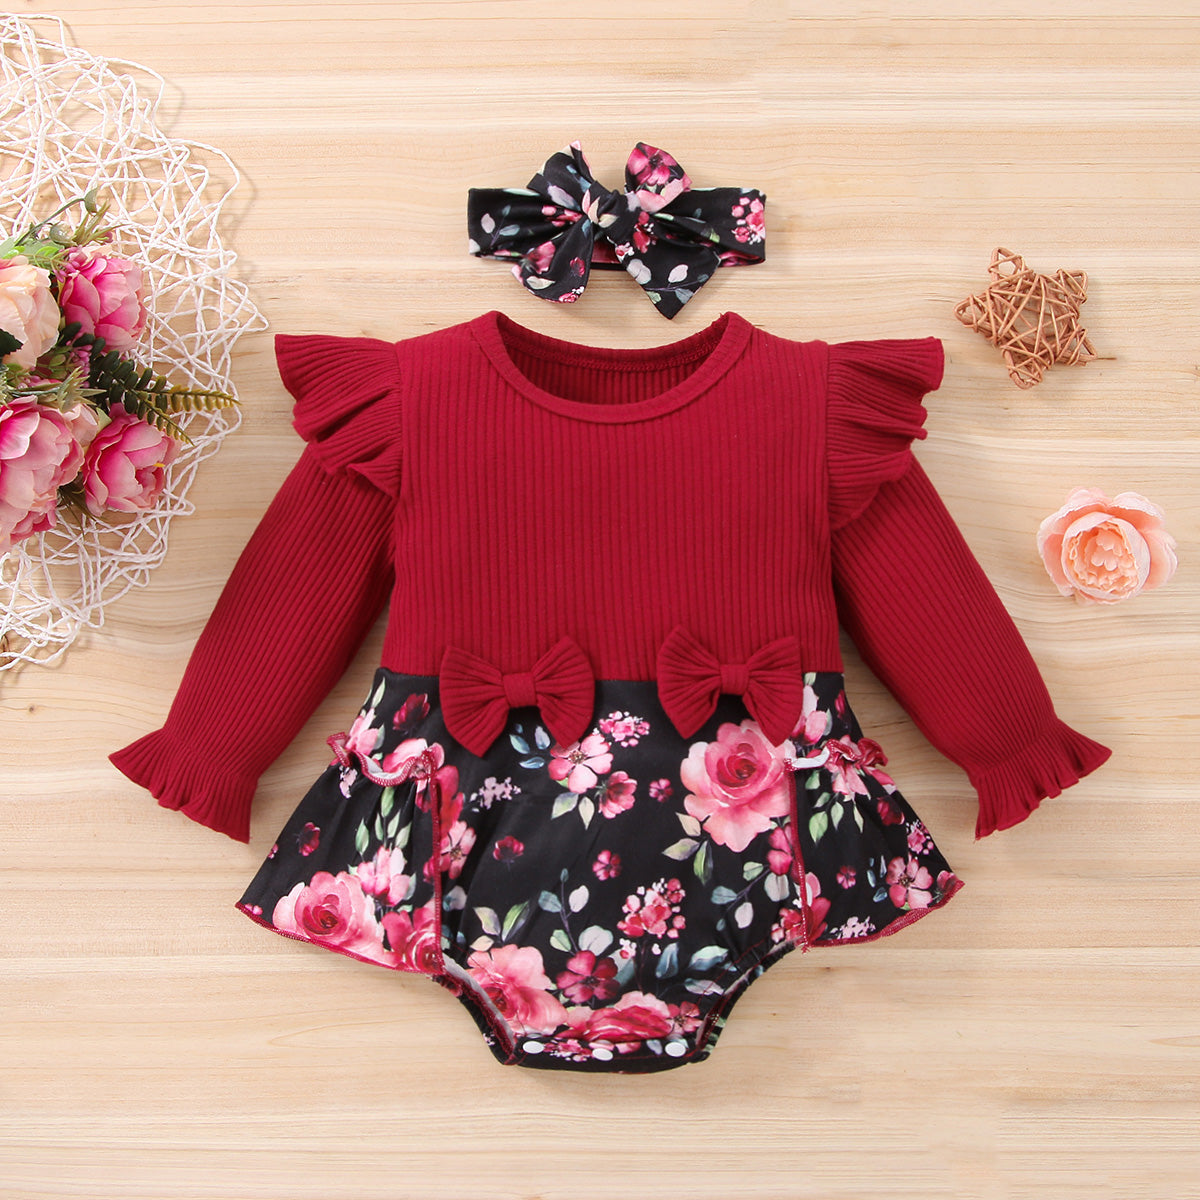 2pcs Baby Girl Red Ribbed Ruffle Long-sleeve Splicing Floral Print Skirted Romper Set